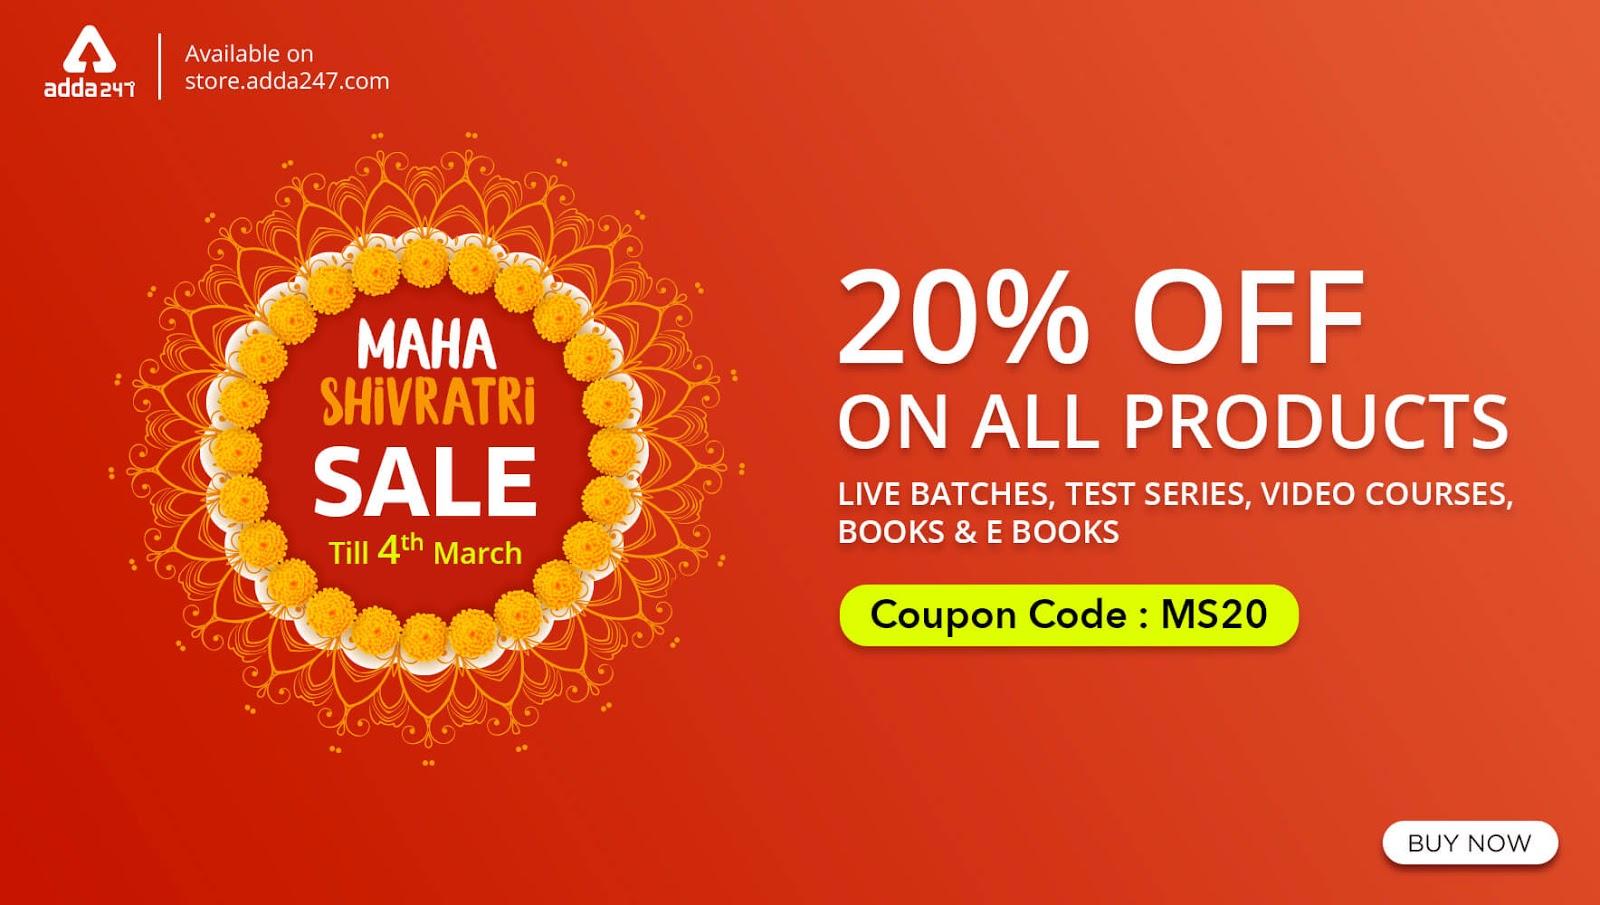 Last 4 Hours Left to Get Maha Shivratri Offer | Flat 20% Off on all Adda247 Test Series, Video Courses, Live Batches, Books & eBooks |_2.1